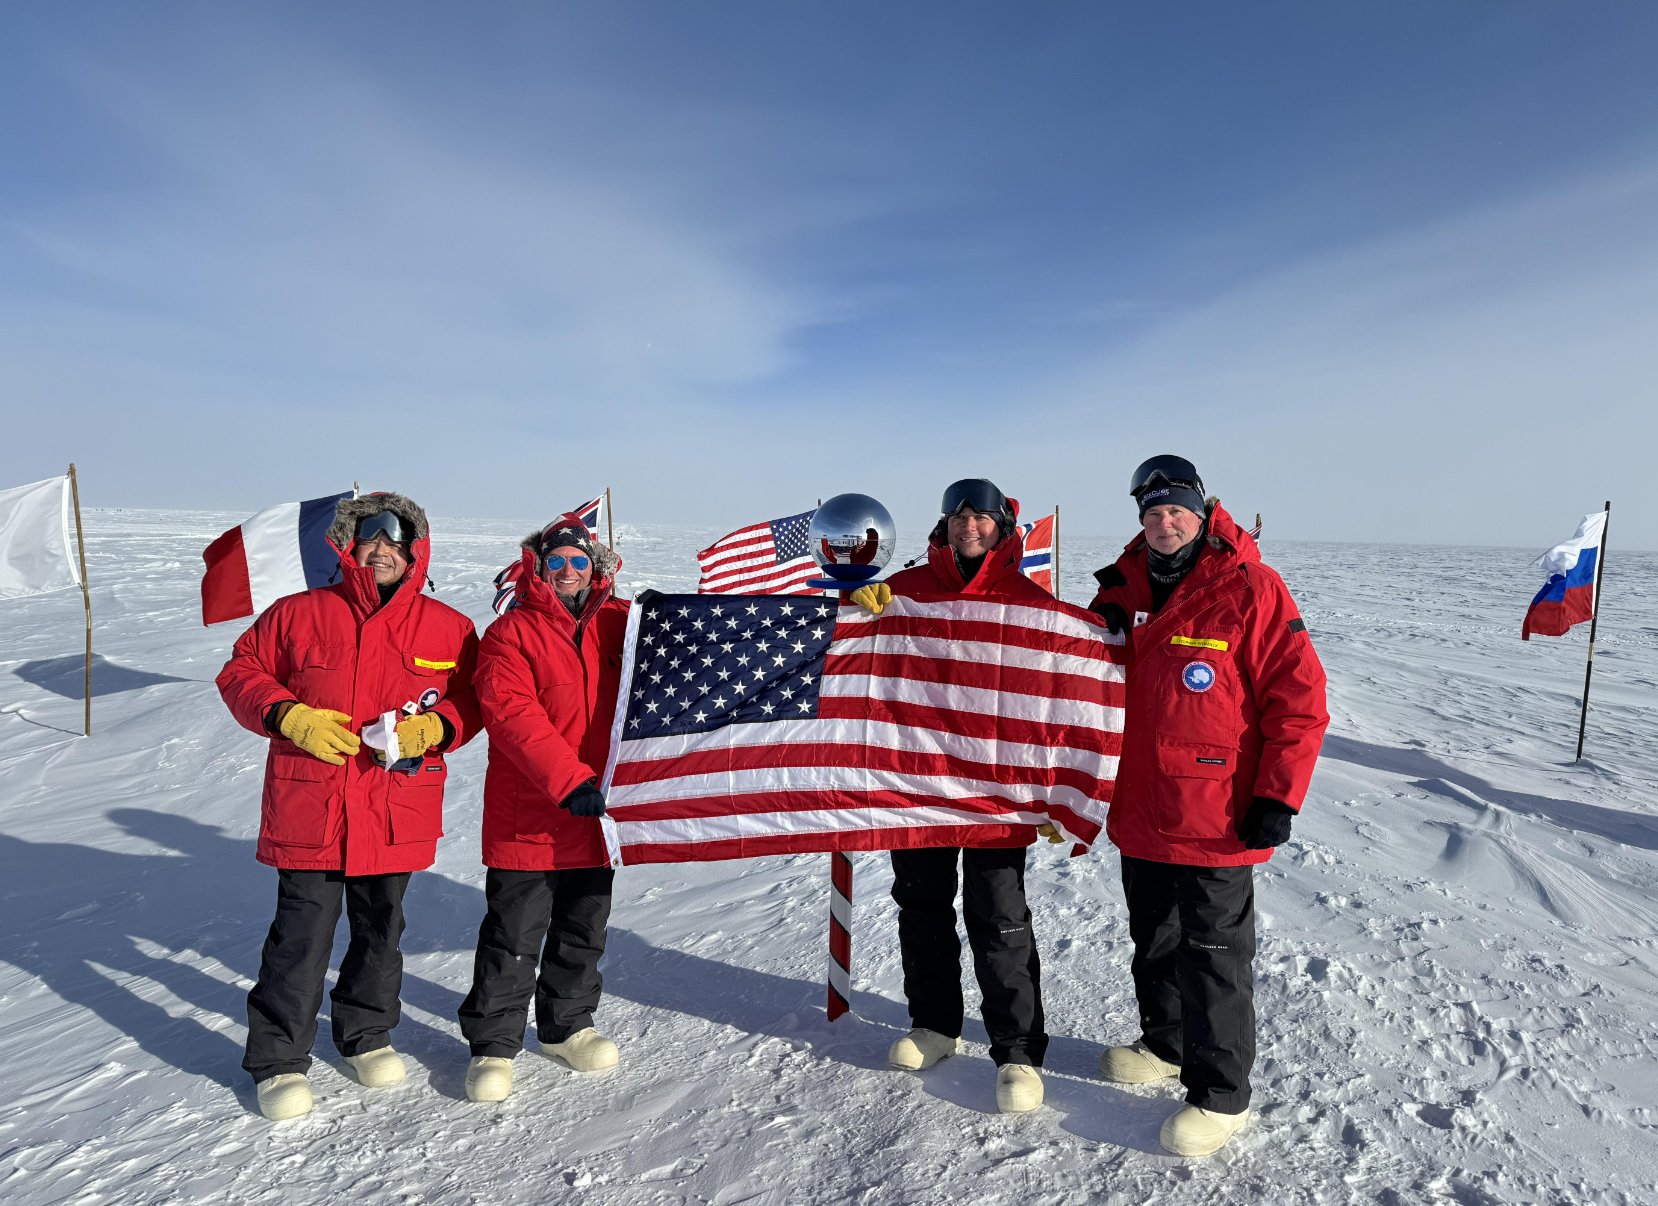 Jake Sherman on X: "Guy Reschenthaler, Steve Womack, Henry Cuellar and Tony Gonzales went to Antartica over the Thanksgiving break. https://t.co/VytB9sp7OT" / X